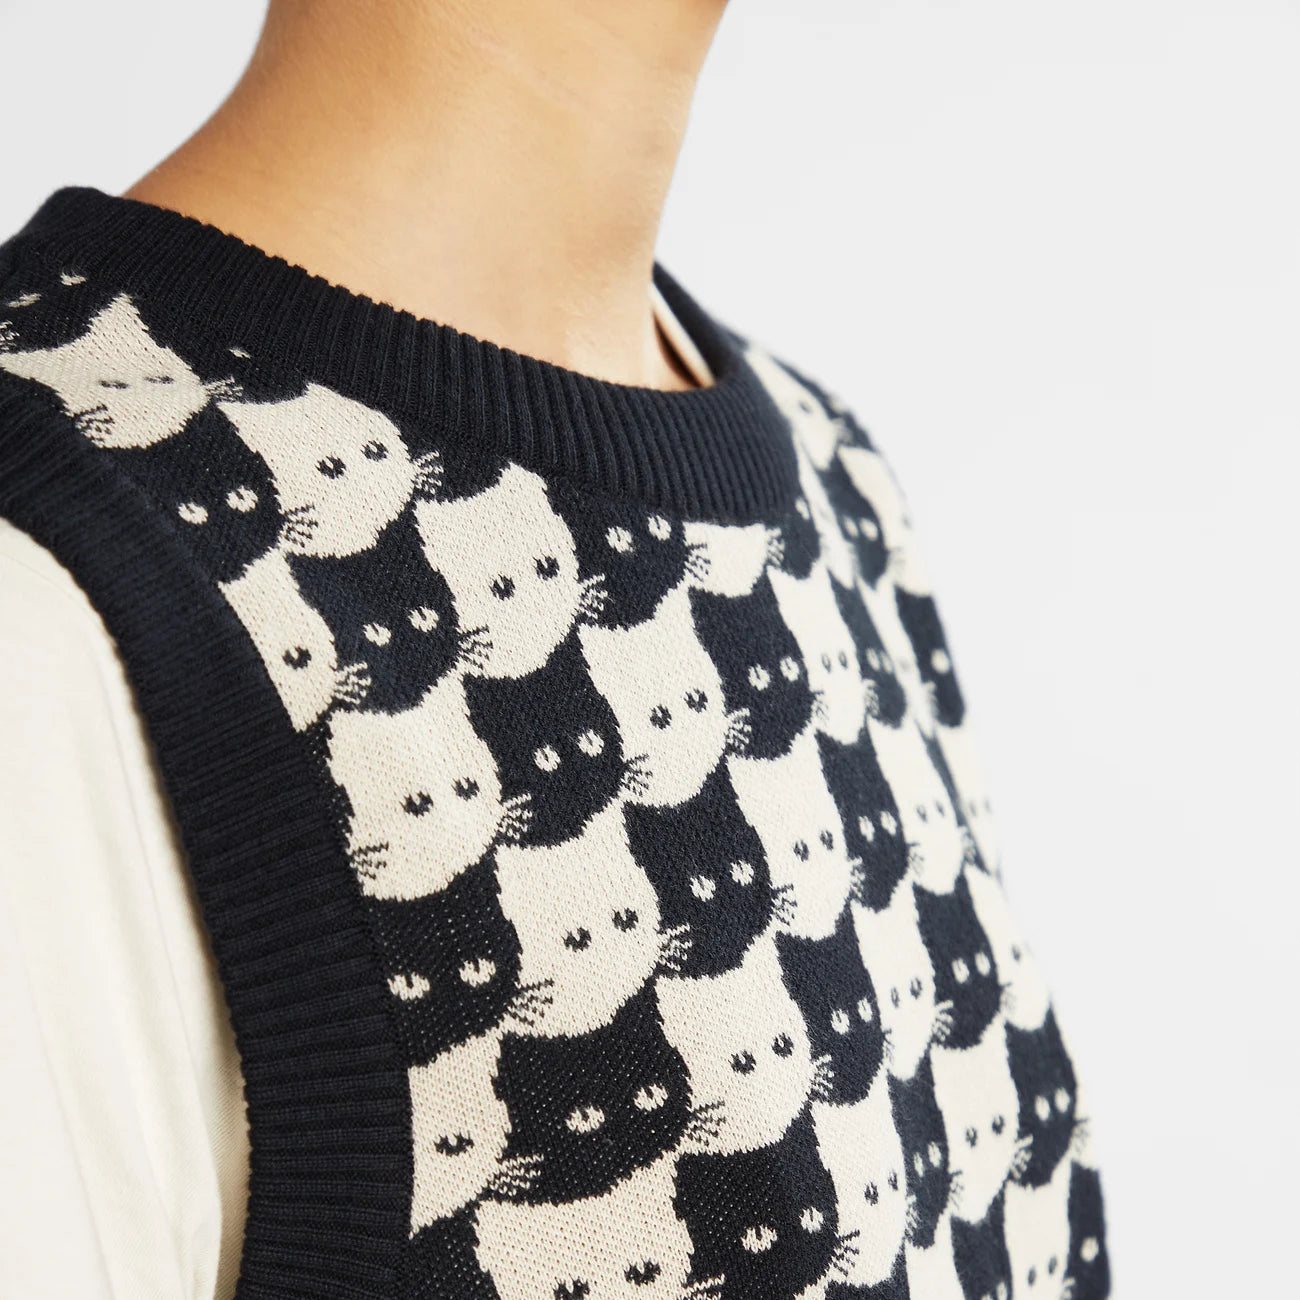 CATS sweater vest made of organic cotton